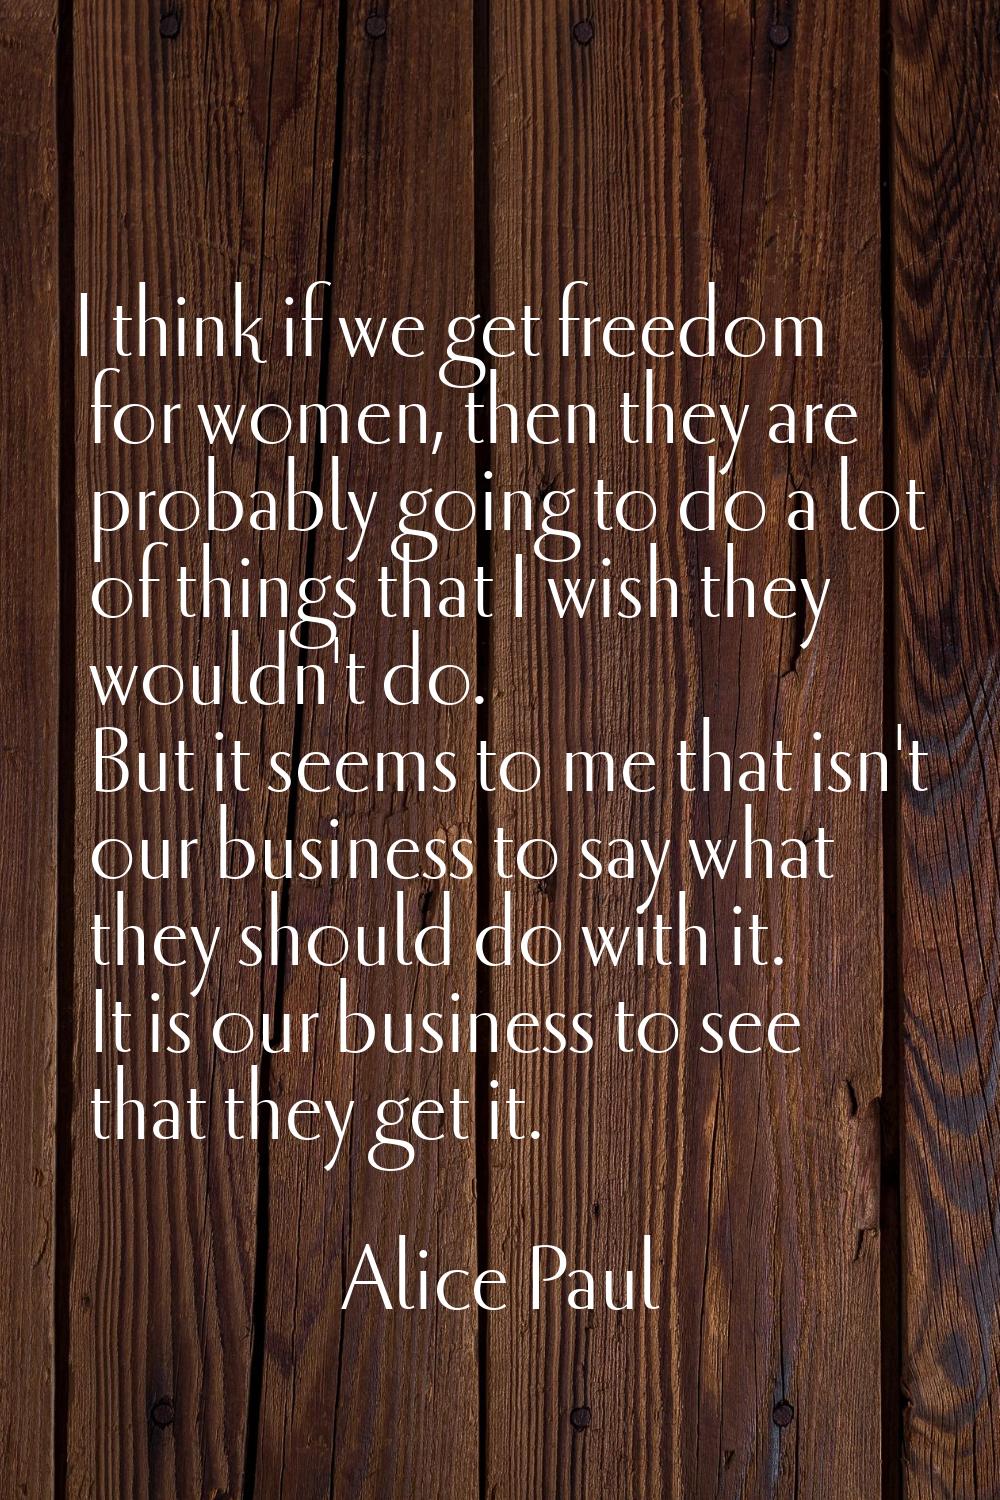 I think if we get freedom for women, then they are probably going to do a lot of things that I wish